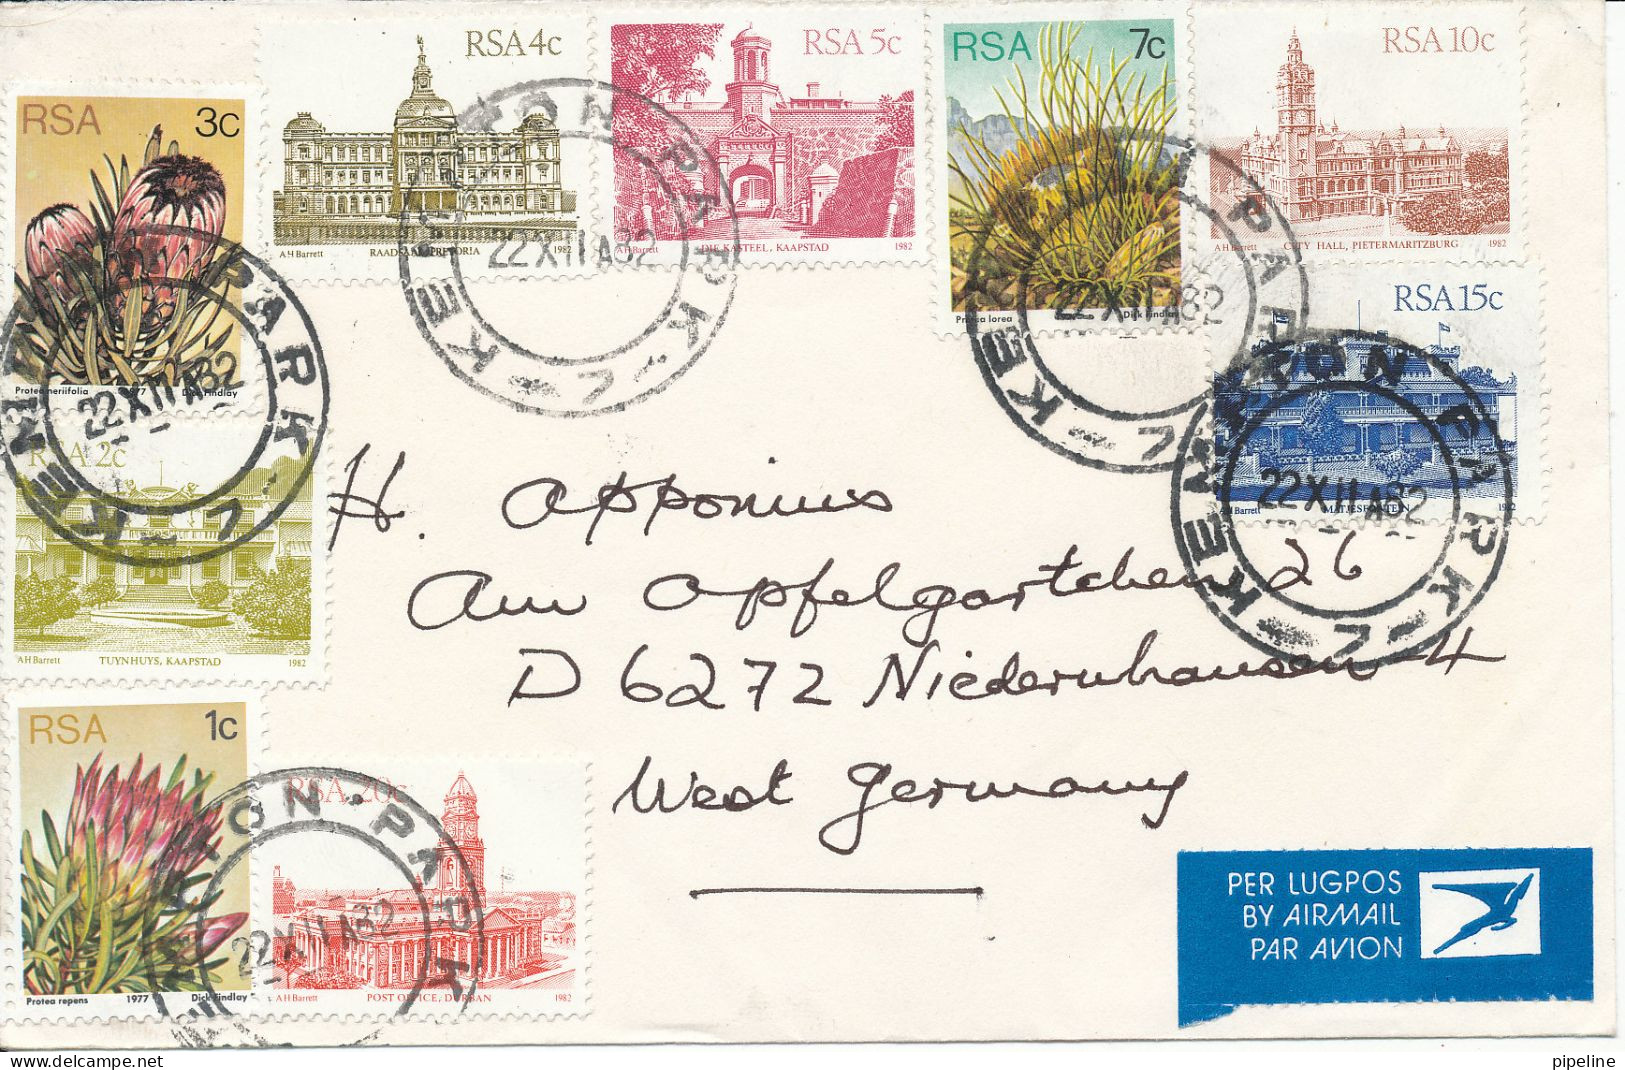 South Africa RSA Cover Sent Air Mail To Germany 22-12-1982 - Covers & Documents